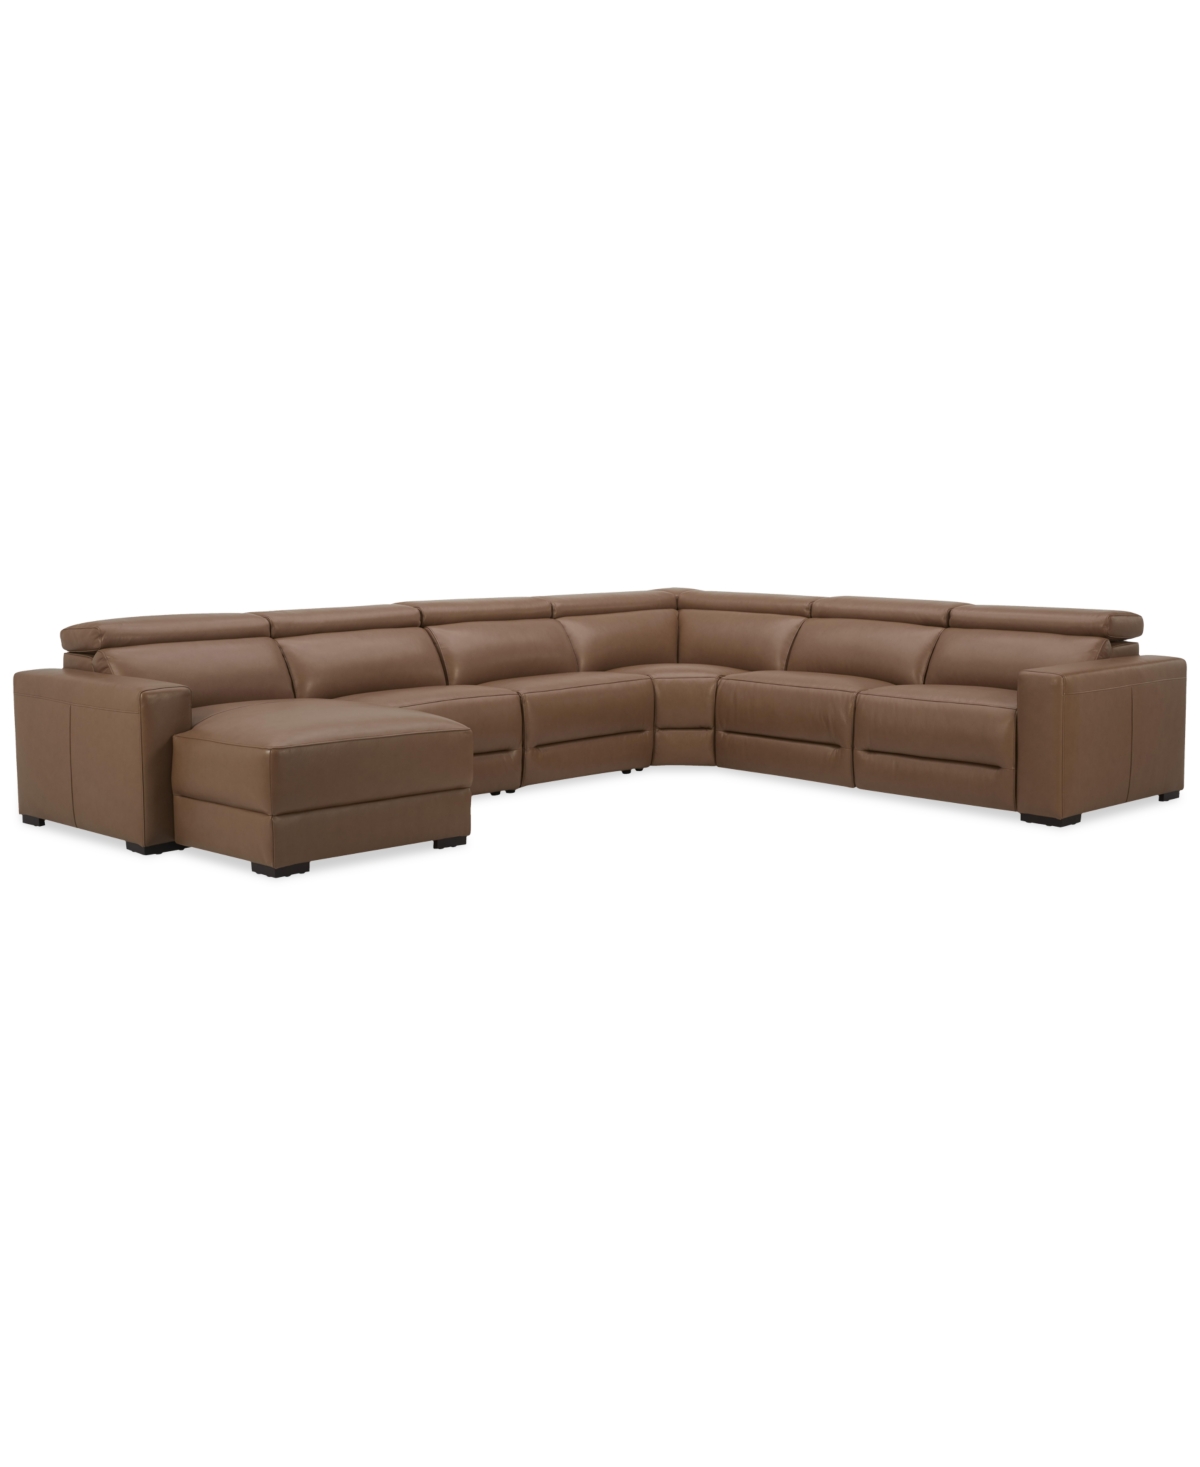 Macy's Nevio 157" 6-pc. Leather Sectional With 3 Power Recliners, Headrests And Chaise, Created For  In Butternut